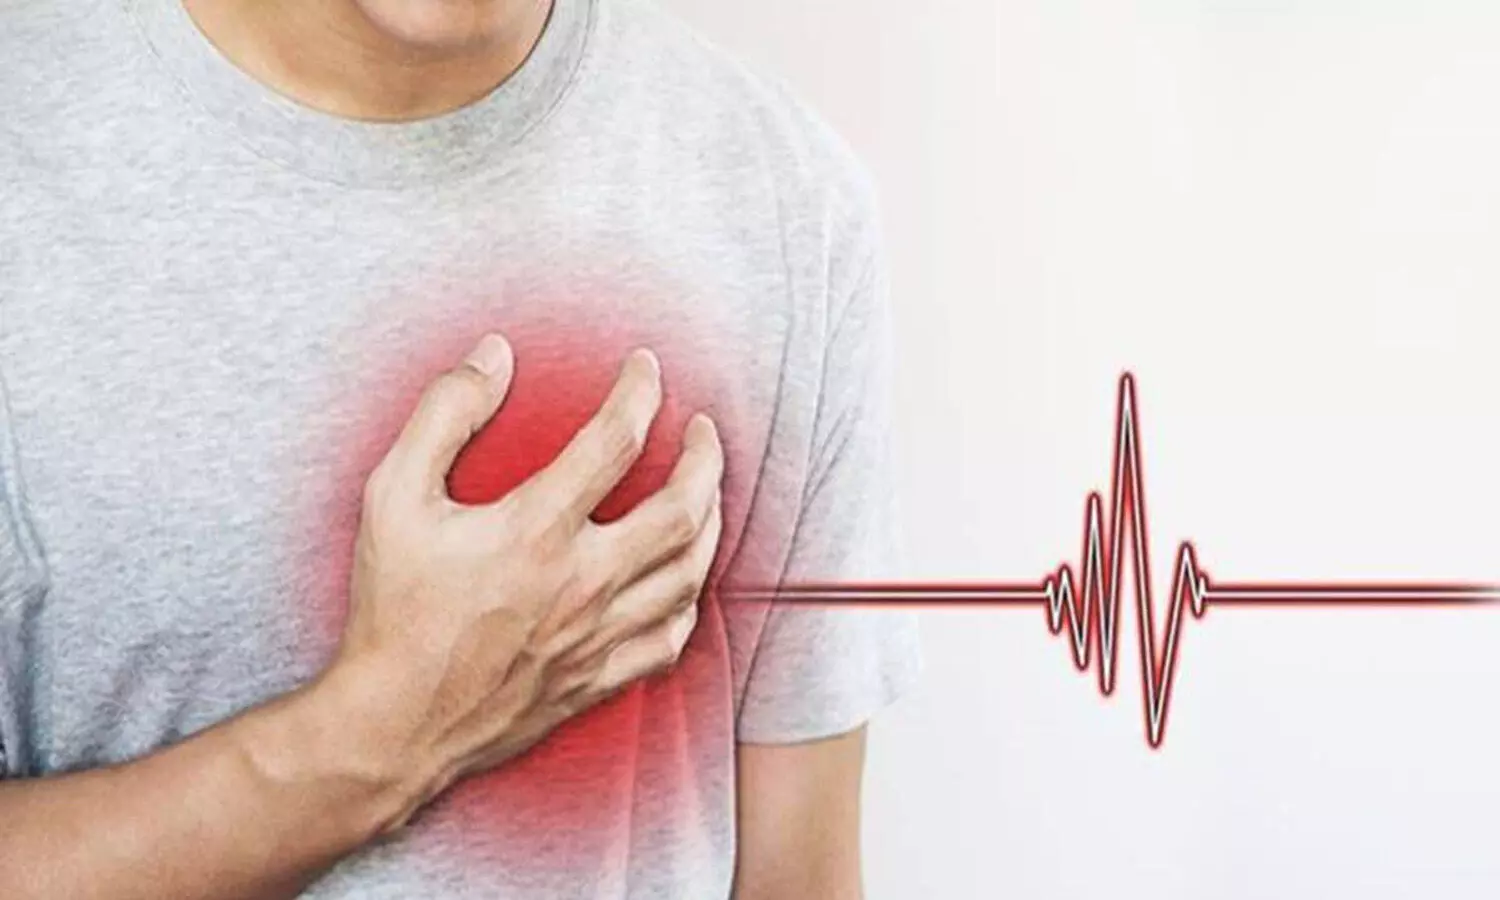 Heart Attacks: Smoking, sedentary lifestyle, supplements are reasons behind sudden deaths